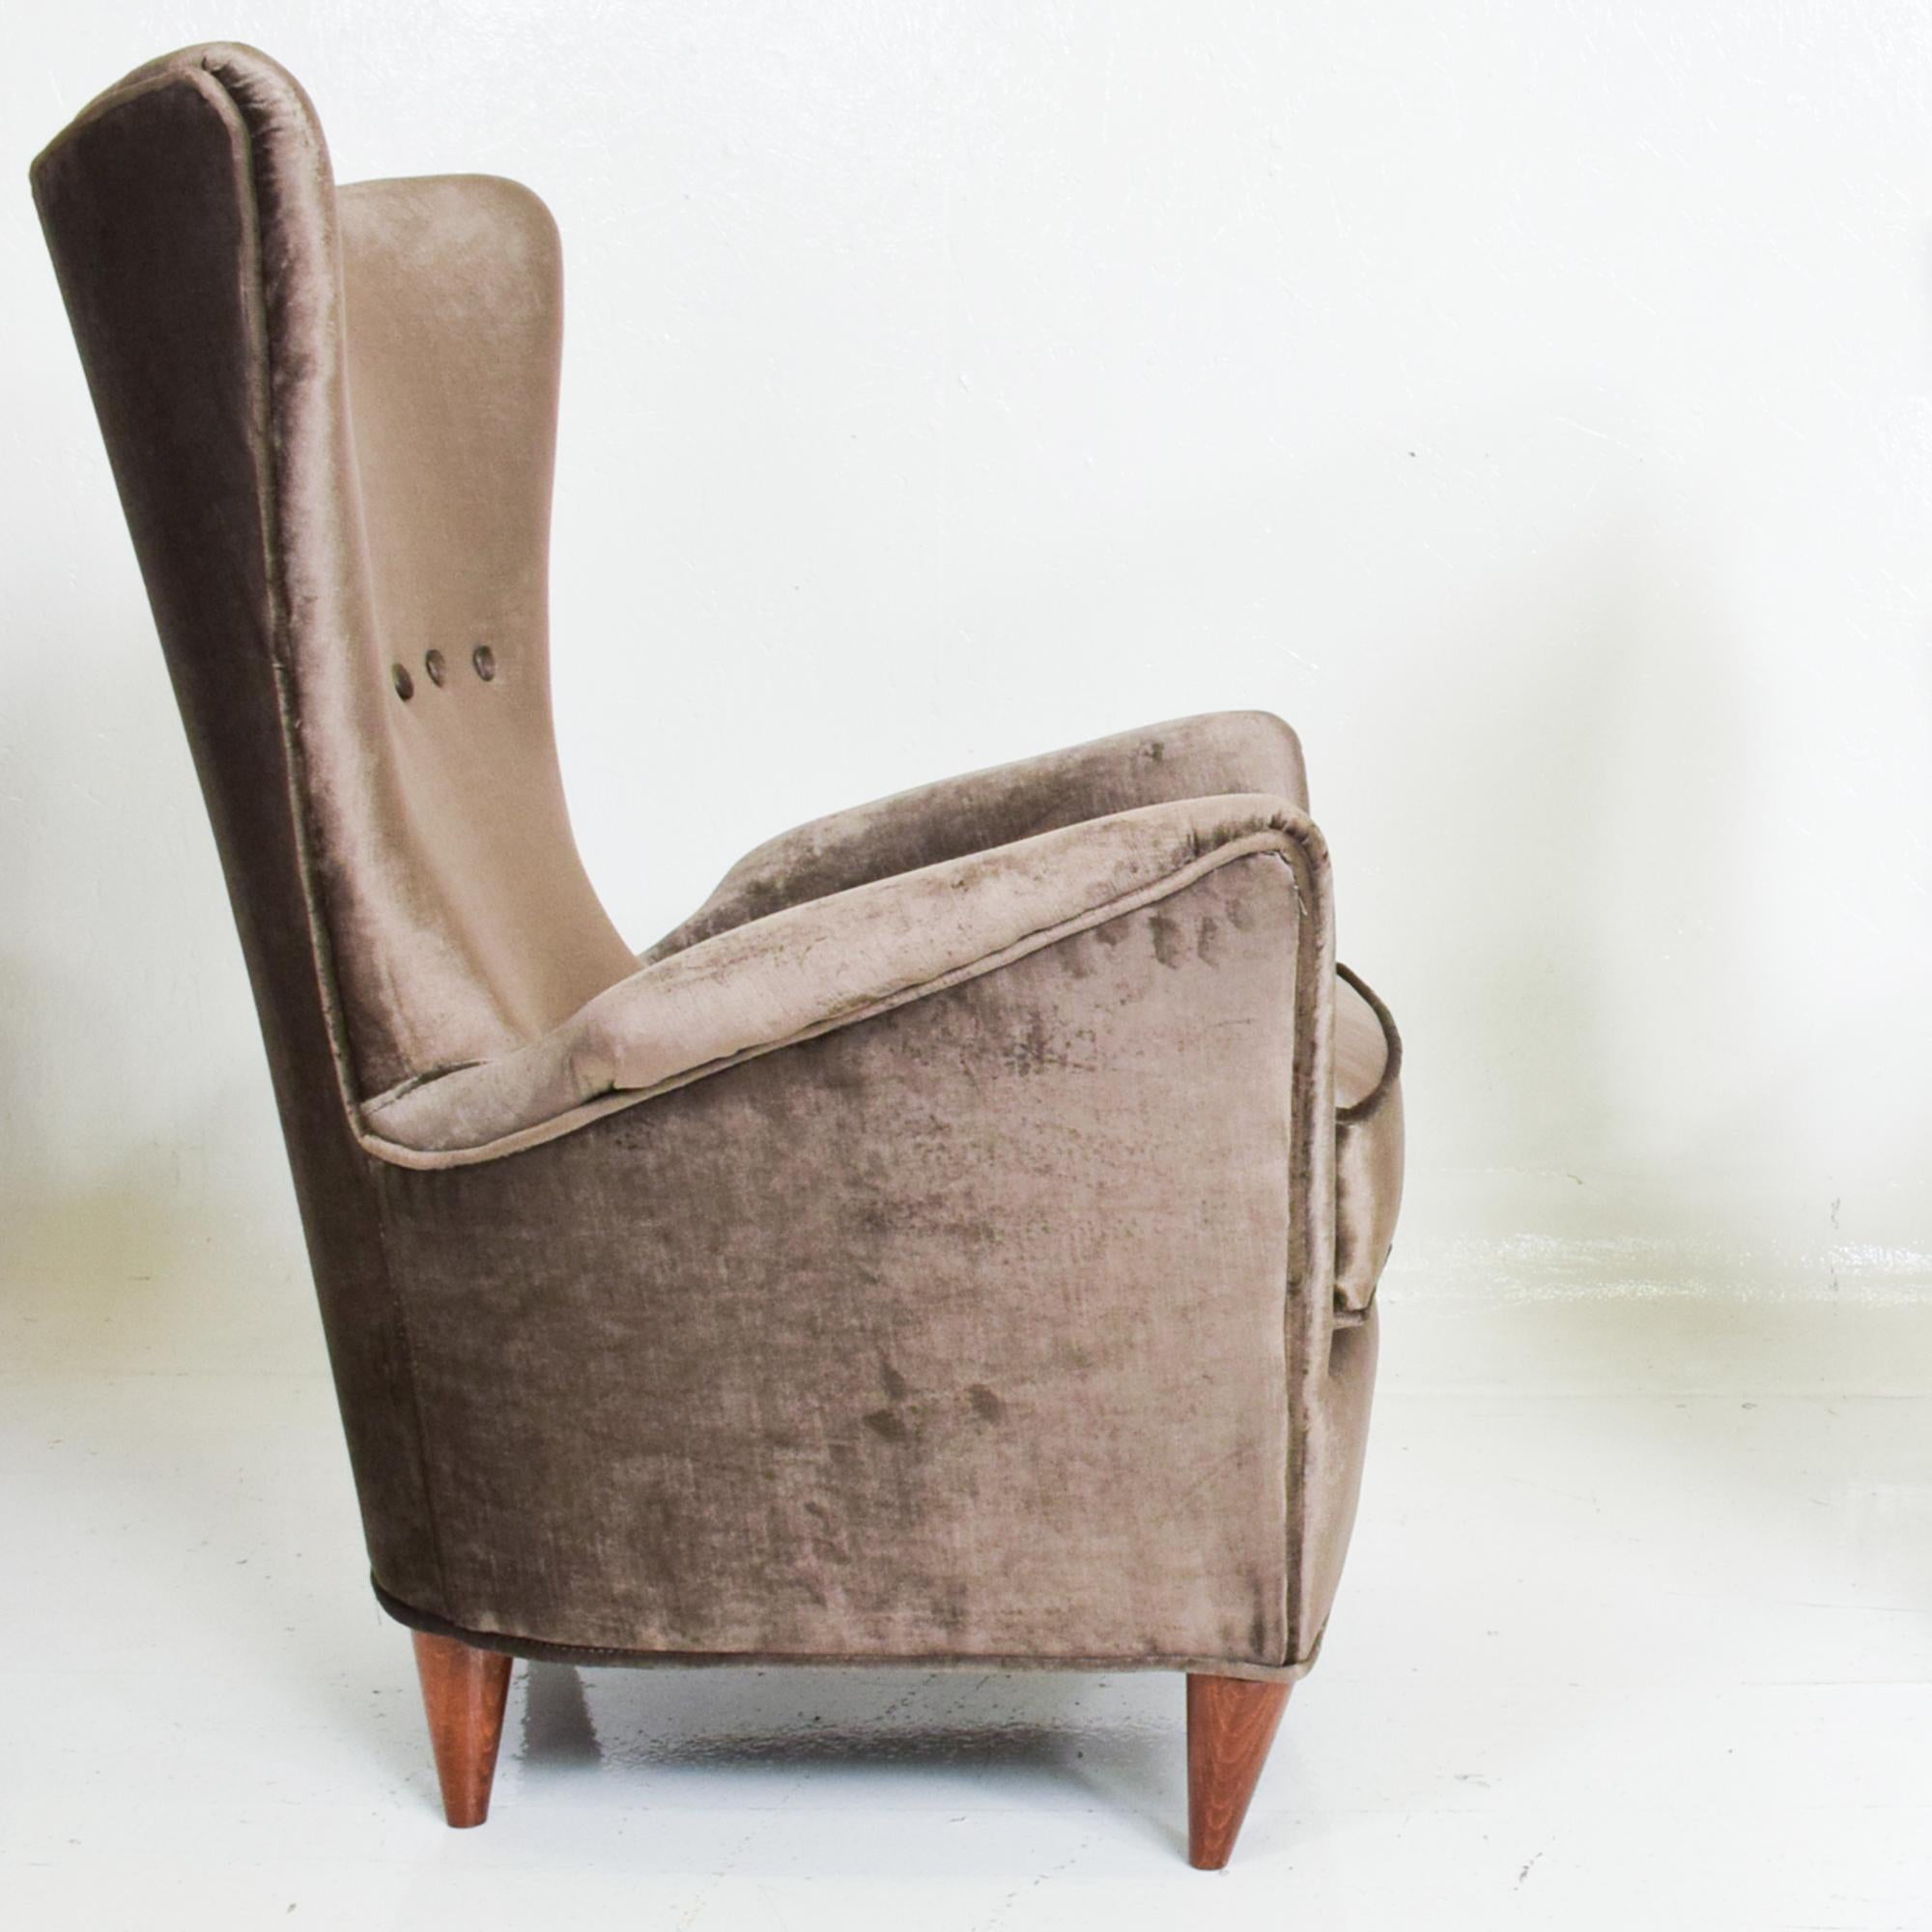 For your consideration: Luxurious pair of armchairs Italian Art Deco design by Gio Ponti for Hotel Bristol Merano Italy.
Low slung arm lounge chairs with sculptural shape.
Made in Italy early 1950s
Dimensions: 36.5 H x 30 D x 26 .5 W Seat 16 H